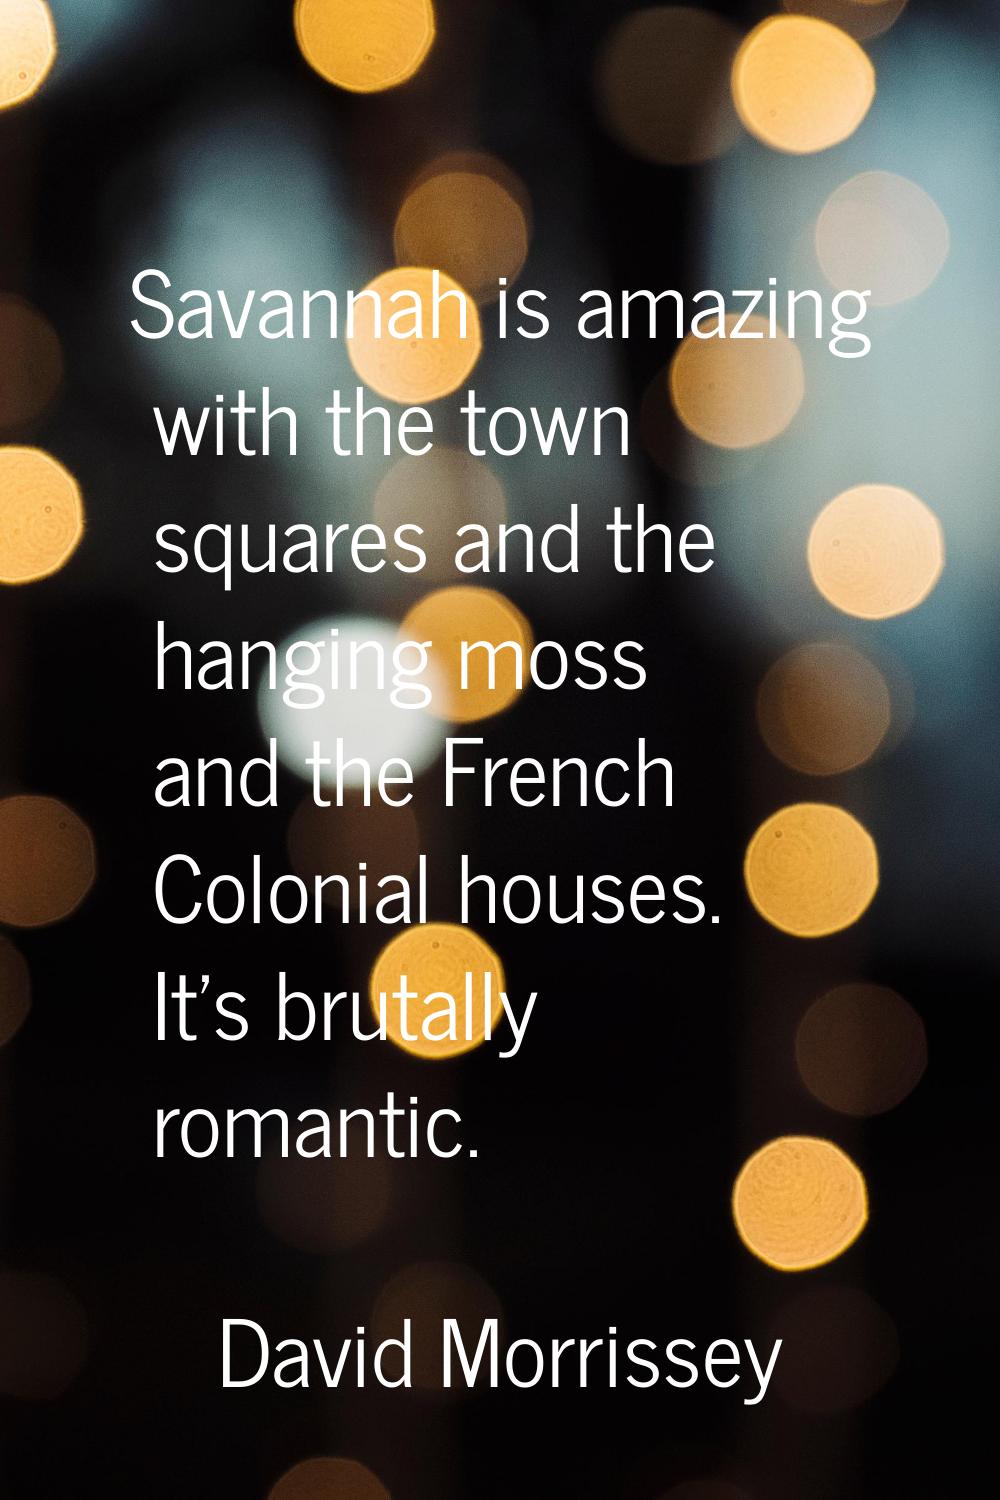 Savannah is amazing with the town squares and the hanging moss and the French Colonial houses. It's